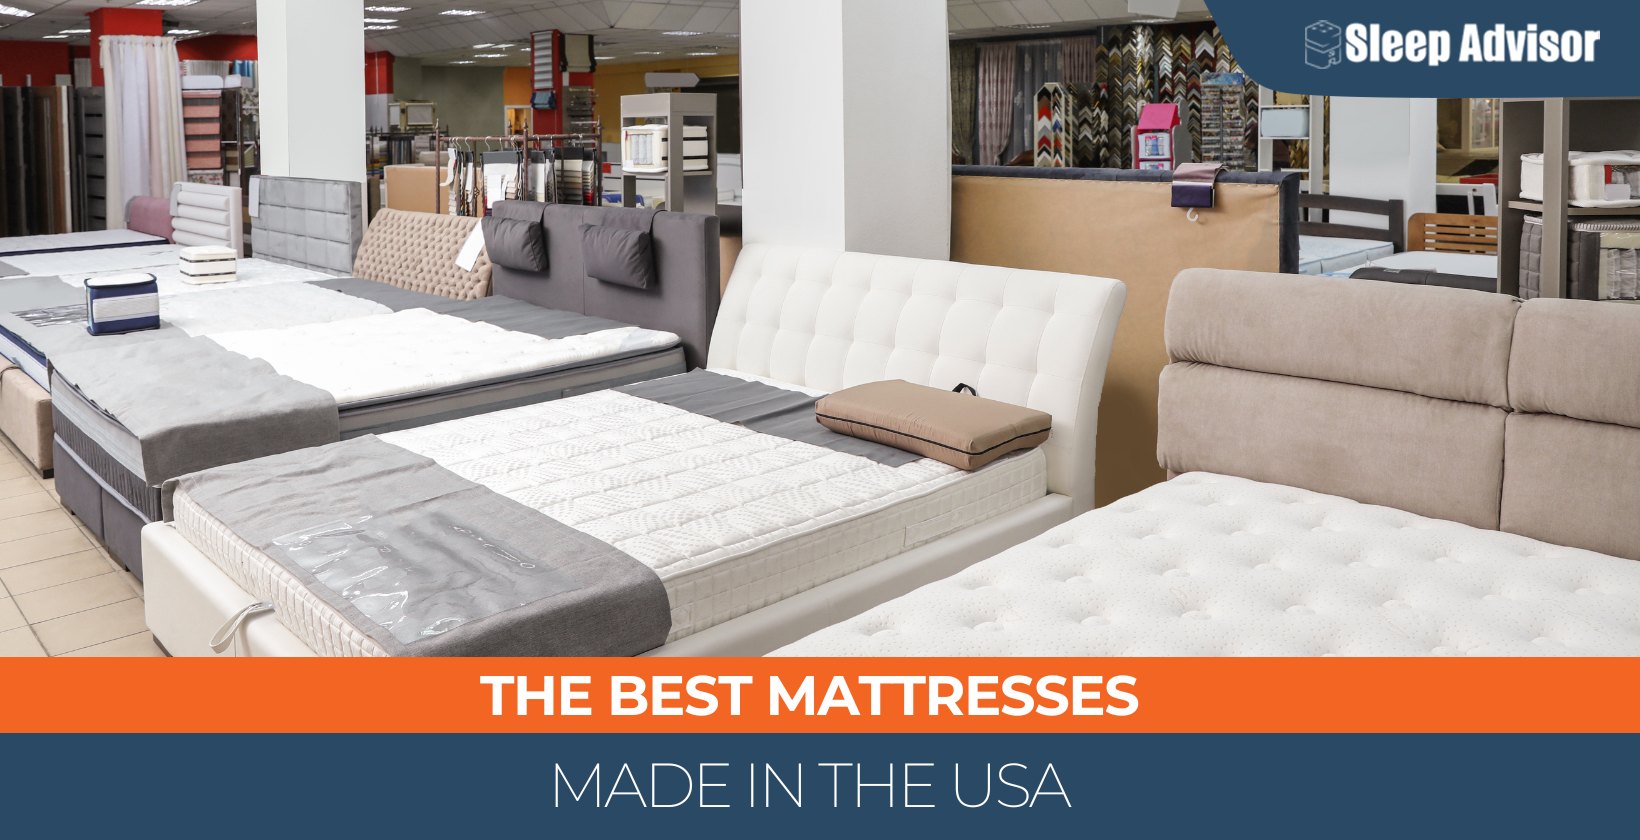 The Best Mattresses Made in the USA